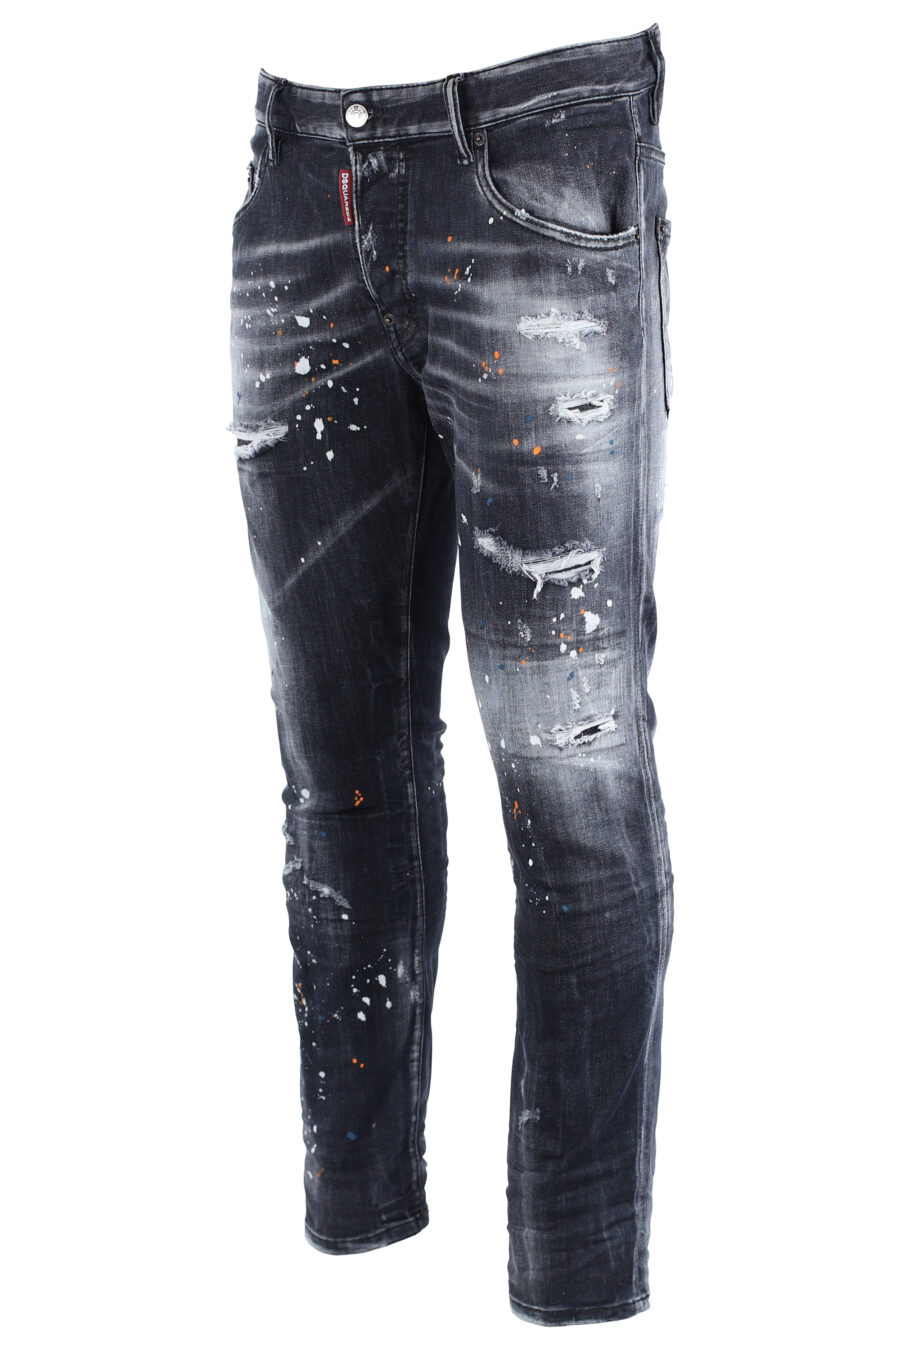 Black "skater jean" jeans with rips - IMG 1609